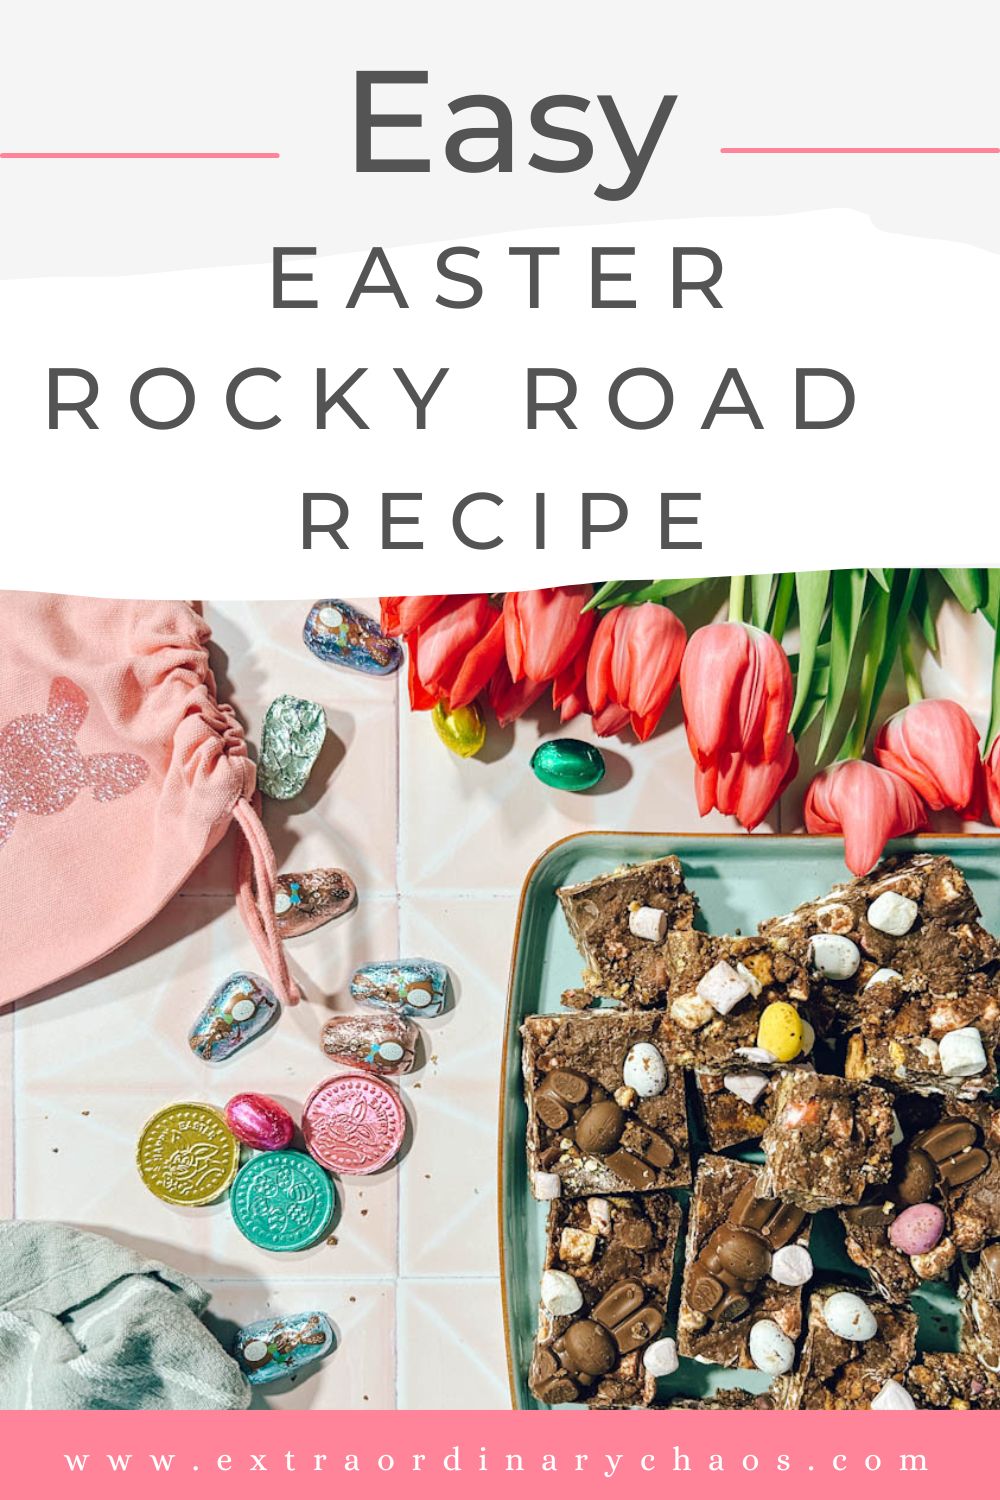 Easy Easter Rocky Road Recipe